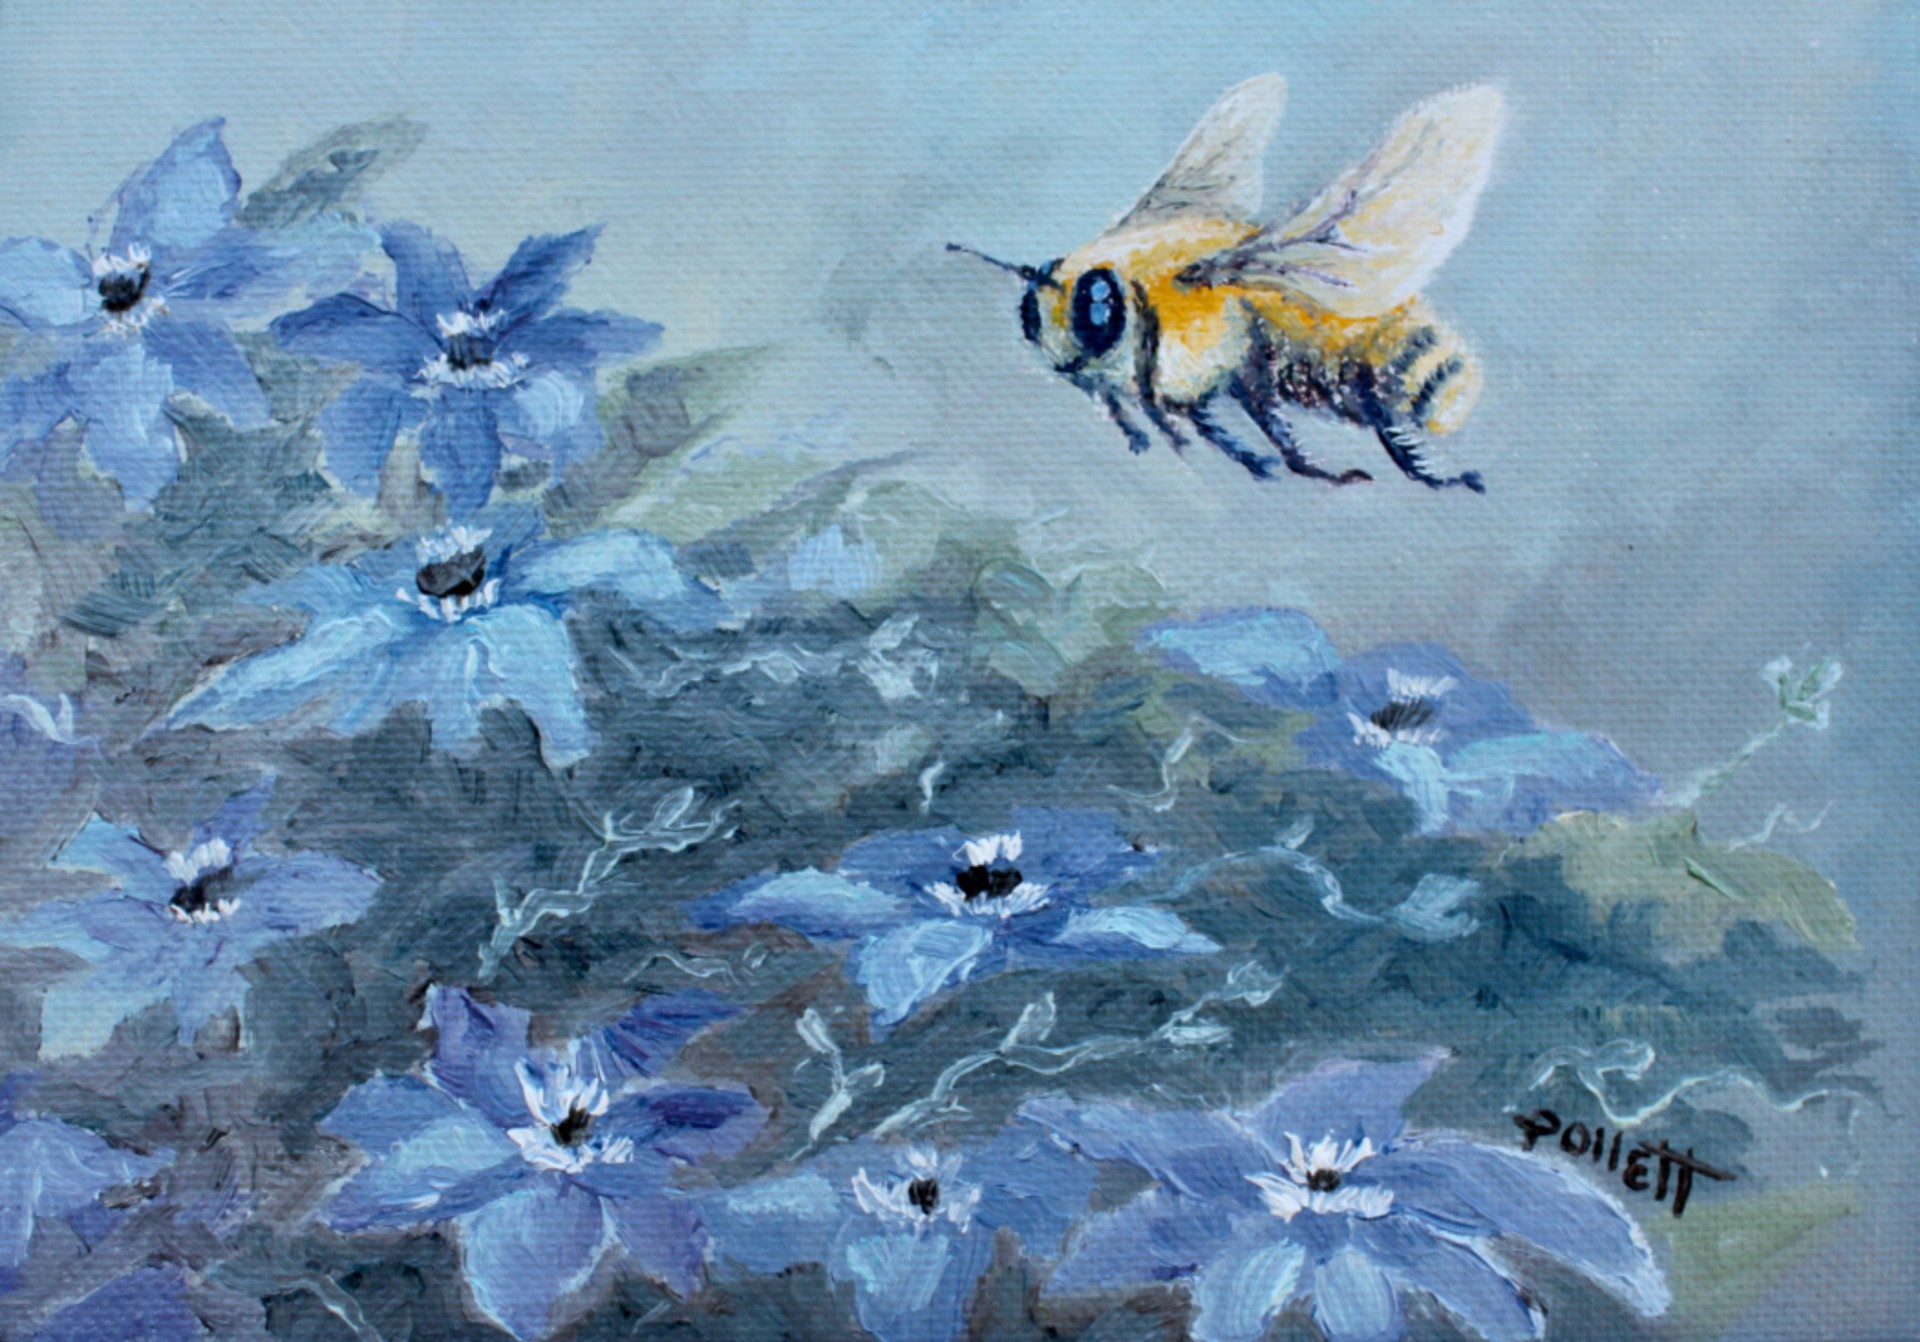 Bee with Blue by Cynthia Jewell Pollett